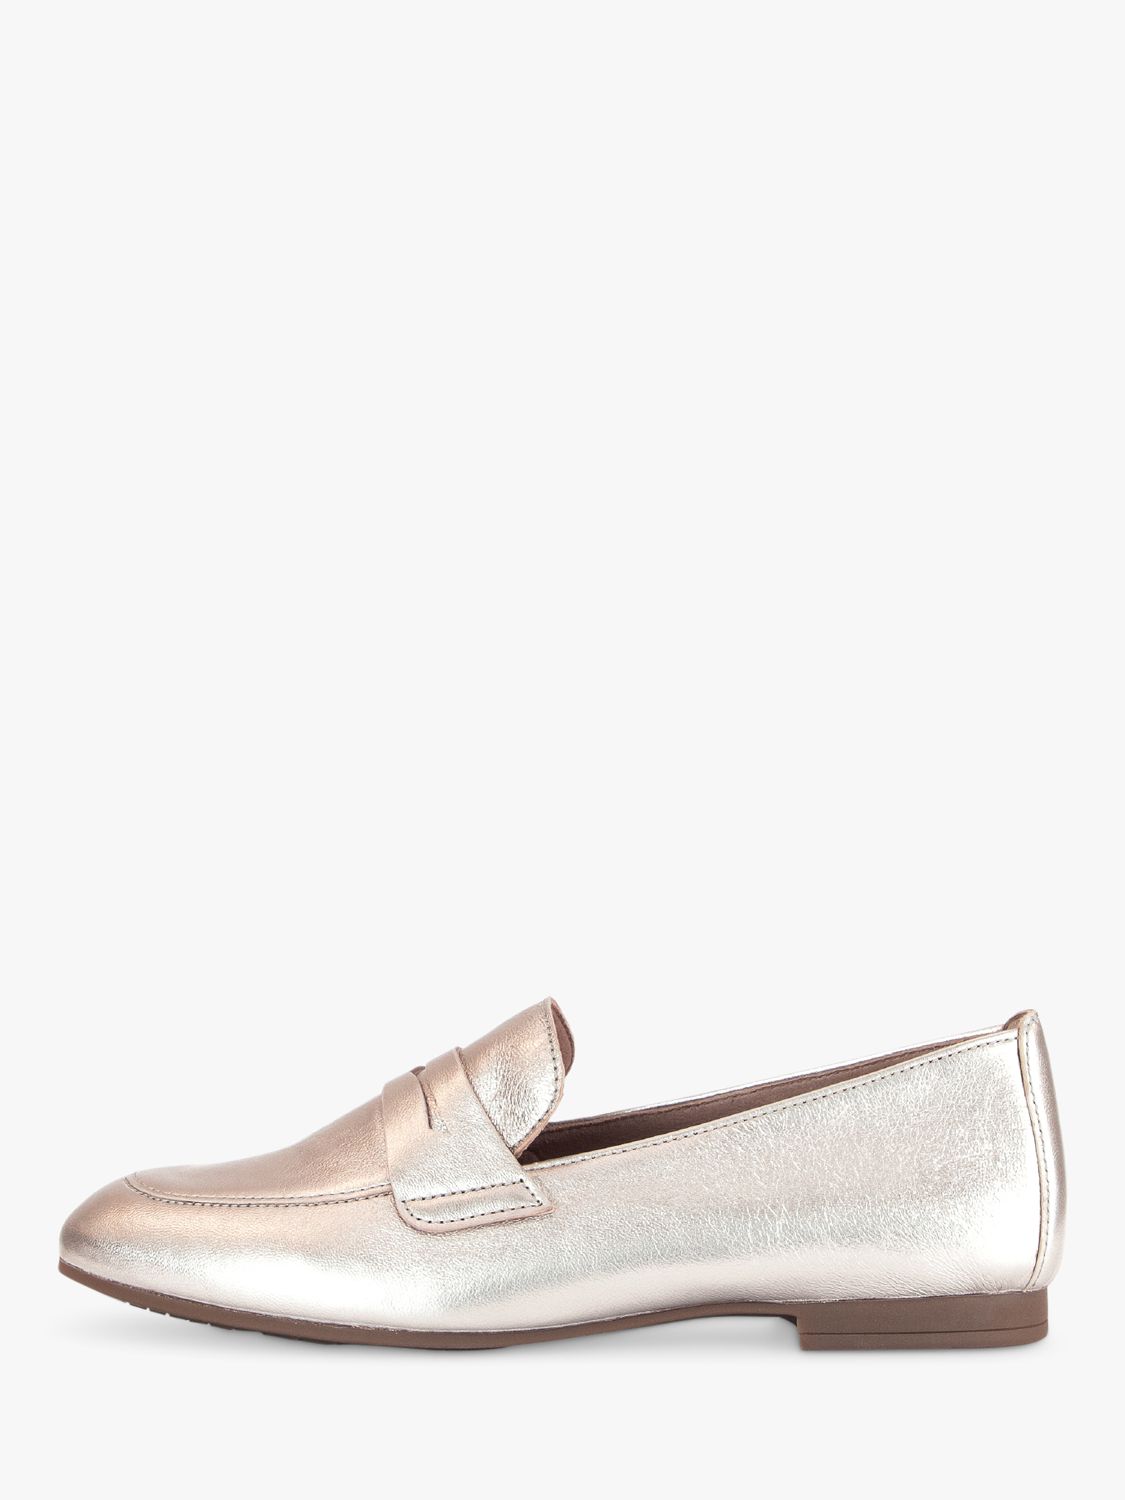 Gabor Viva Leather Loafers, Gold